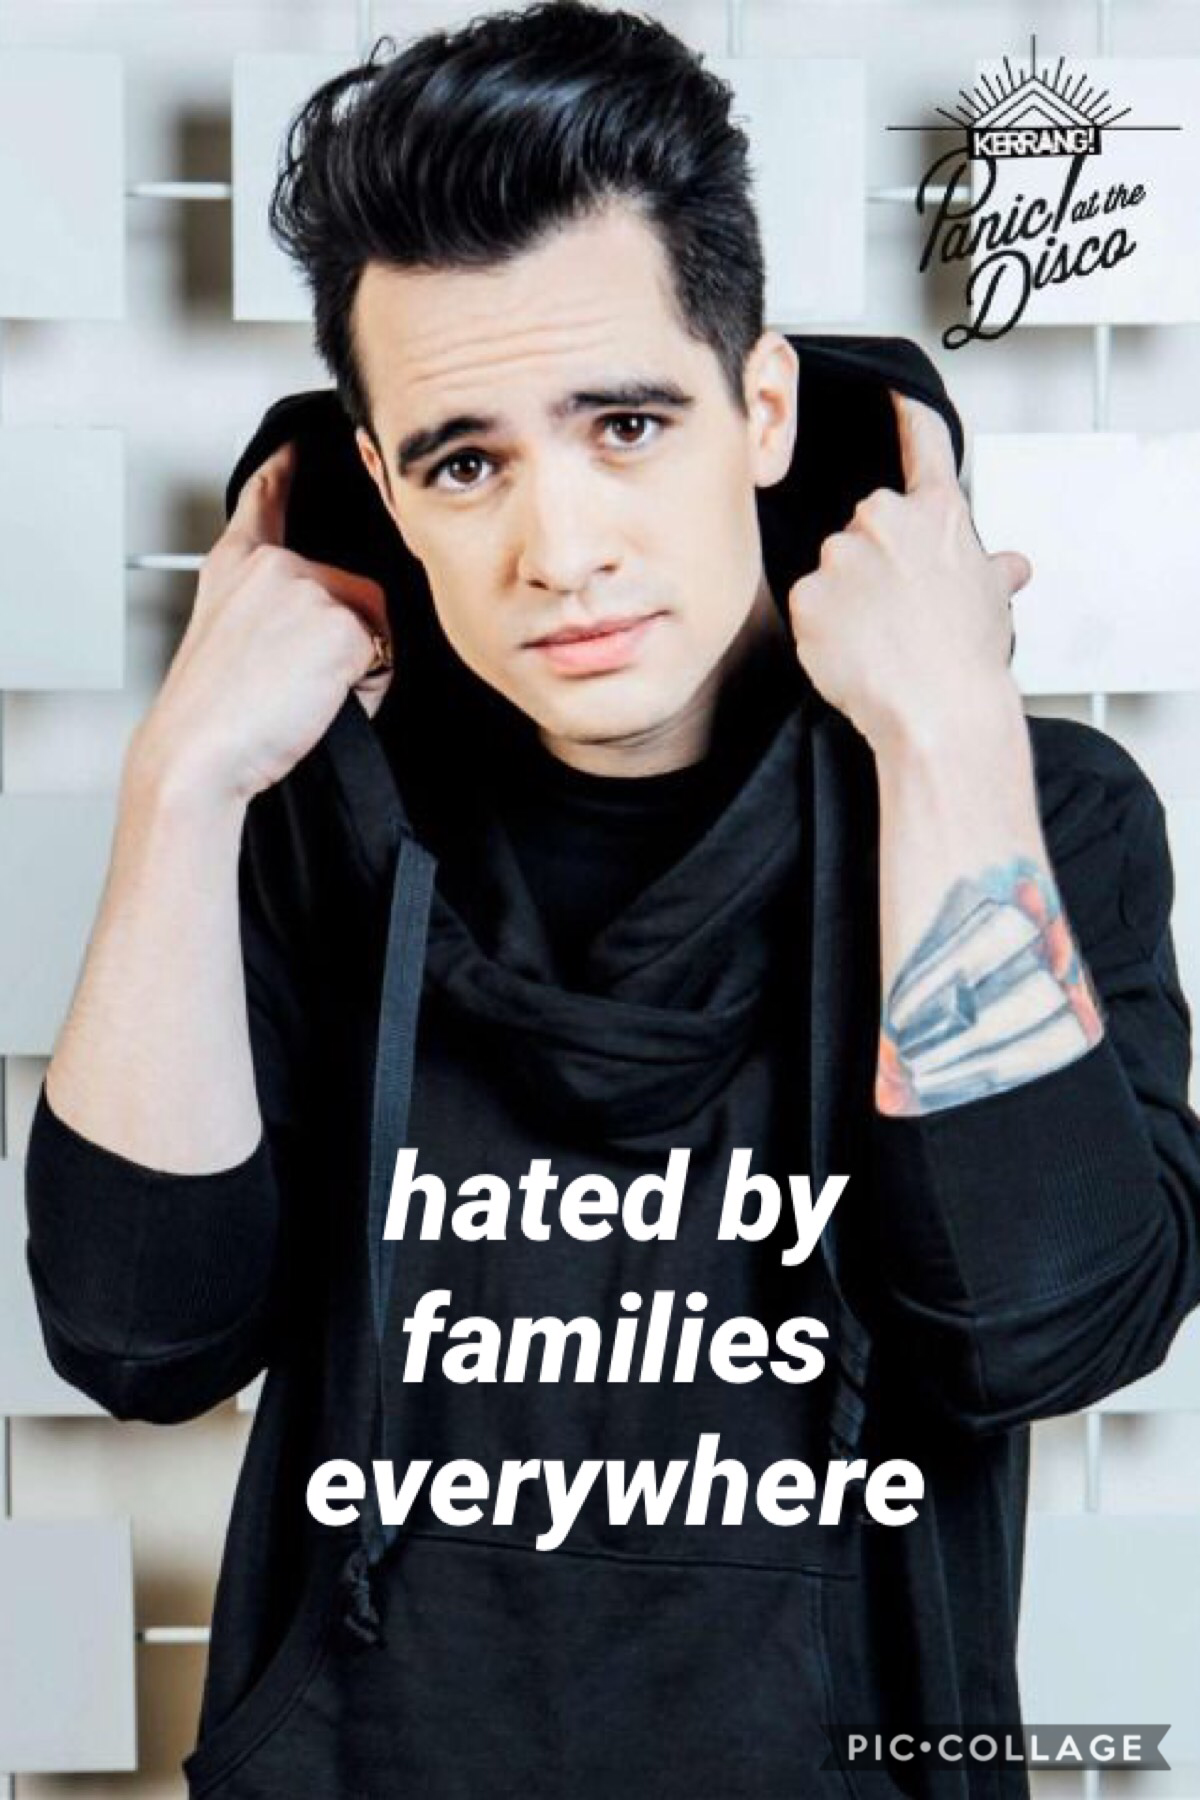 TAP
when you watch brendon urie clips
“i need a shirt that says hated by families everywhere- i get so many comments that say ‘my family hates you but i love you’”